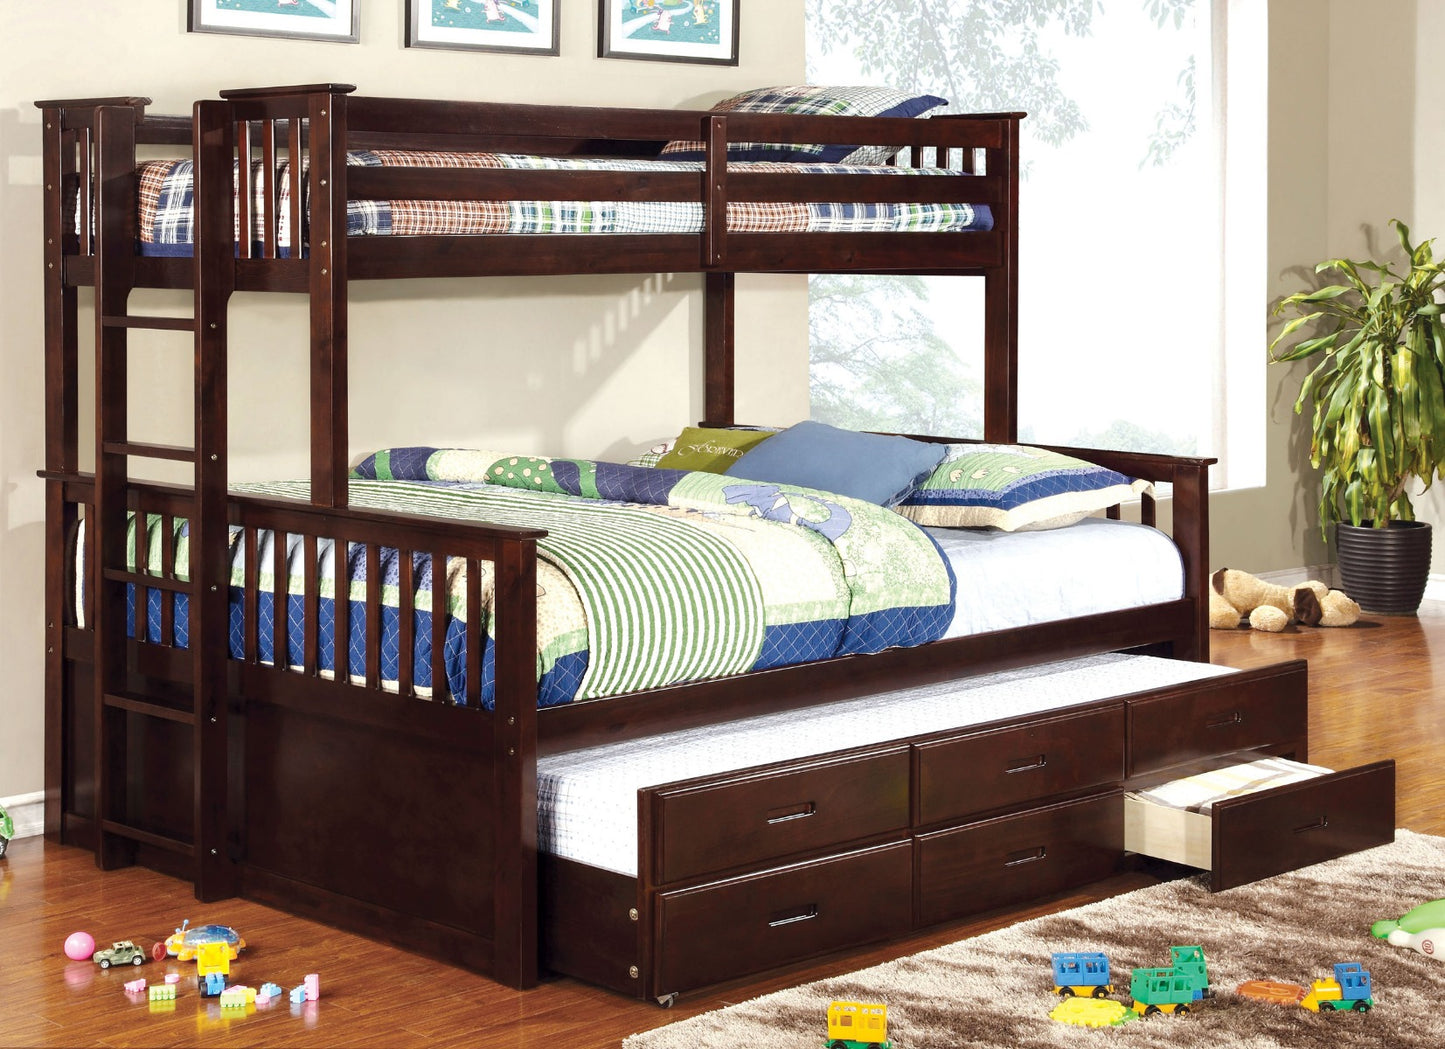 University Twin/Queen Bunk Bed - 2 Finishes